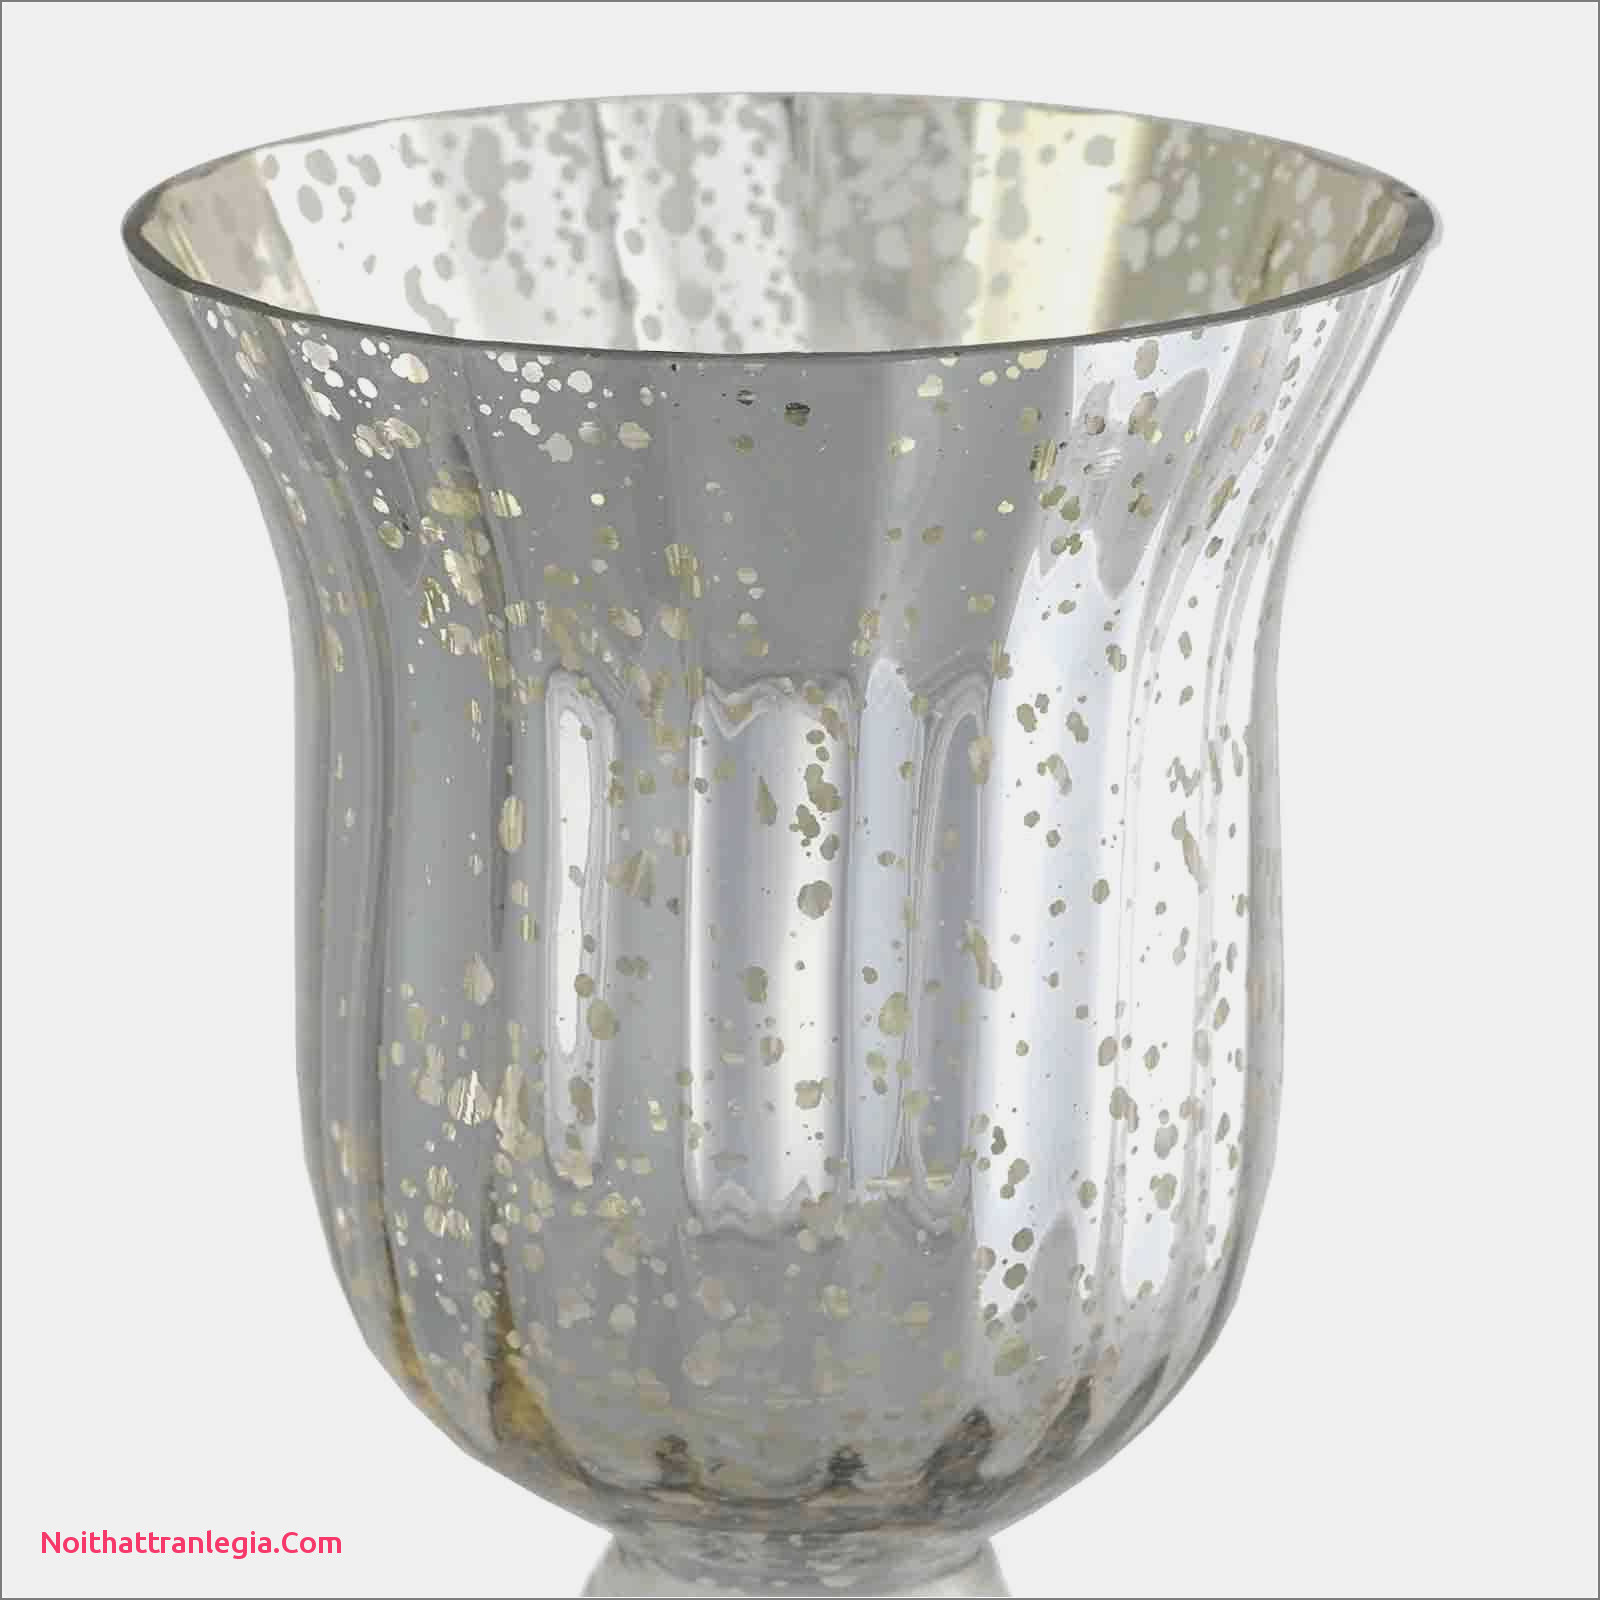 26 Unique Tall Acrylic Vases wholesale 2024 free download tall acrylic vases wholesale of 20 wedding vases noithattranlegia vases design in wedding guest gift ideas inspirational candles for wedding favors superb pe s5h vases candle vase i